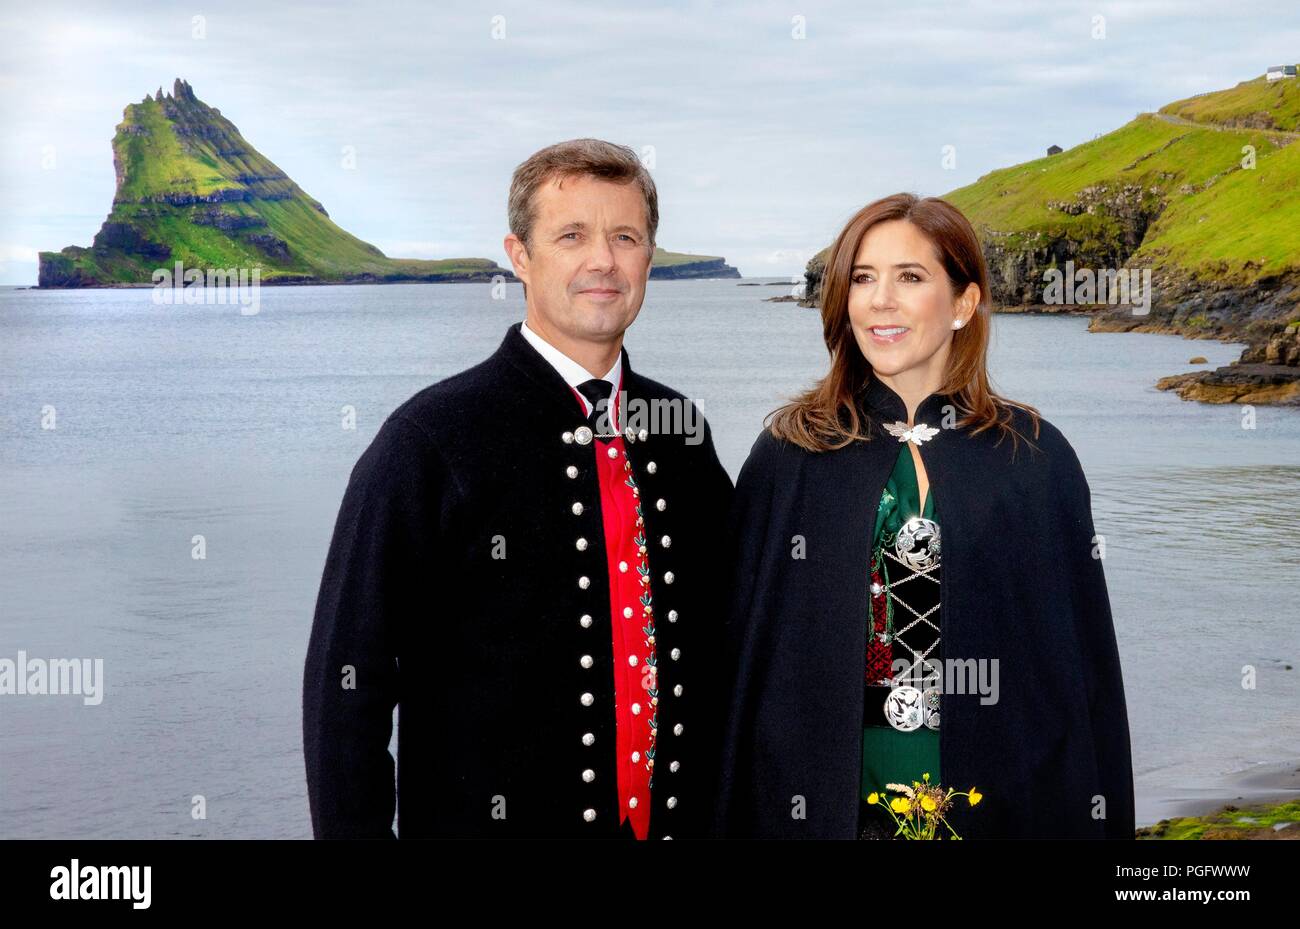 Bour, Faroe Islands, Denmark. 26th Aug, 2018. Crown Prince Frederik and Crown Princess Mary of Denmark at Bour, on August 26, 2018, to attend a lunch on the last of the 4 days visit to the Faroe Islands Photo : Albert Nieboer/ Netherlands OUT/Point de Vue OUT | Credit: dpa/Alamy Live News Stock Photo